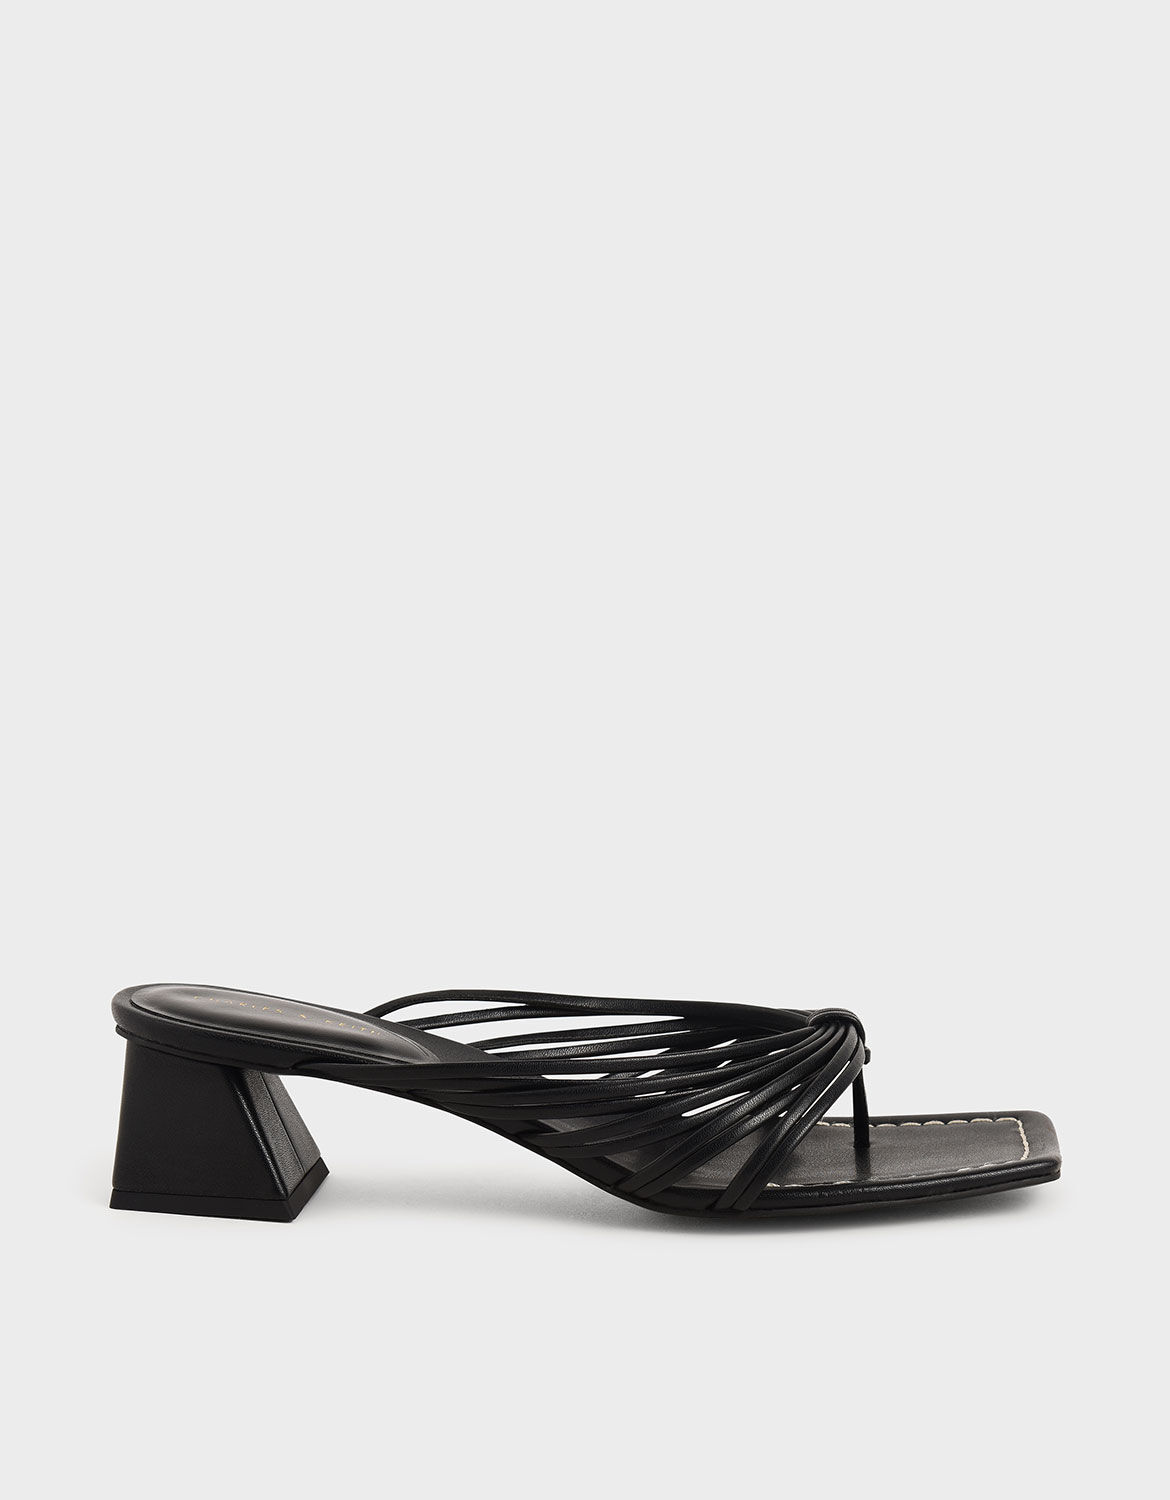 charles and keith heels price